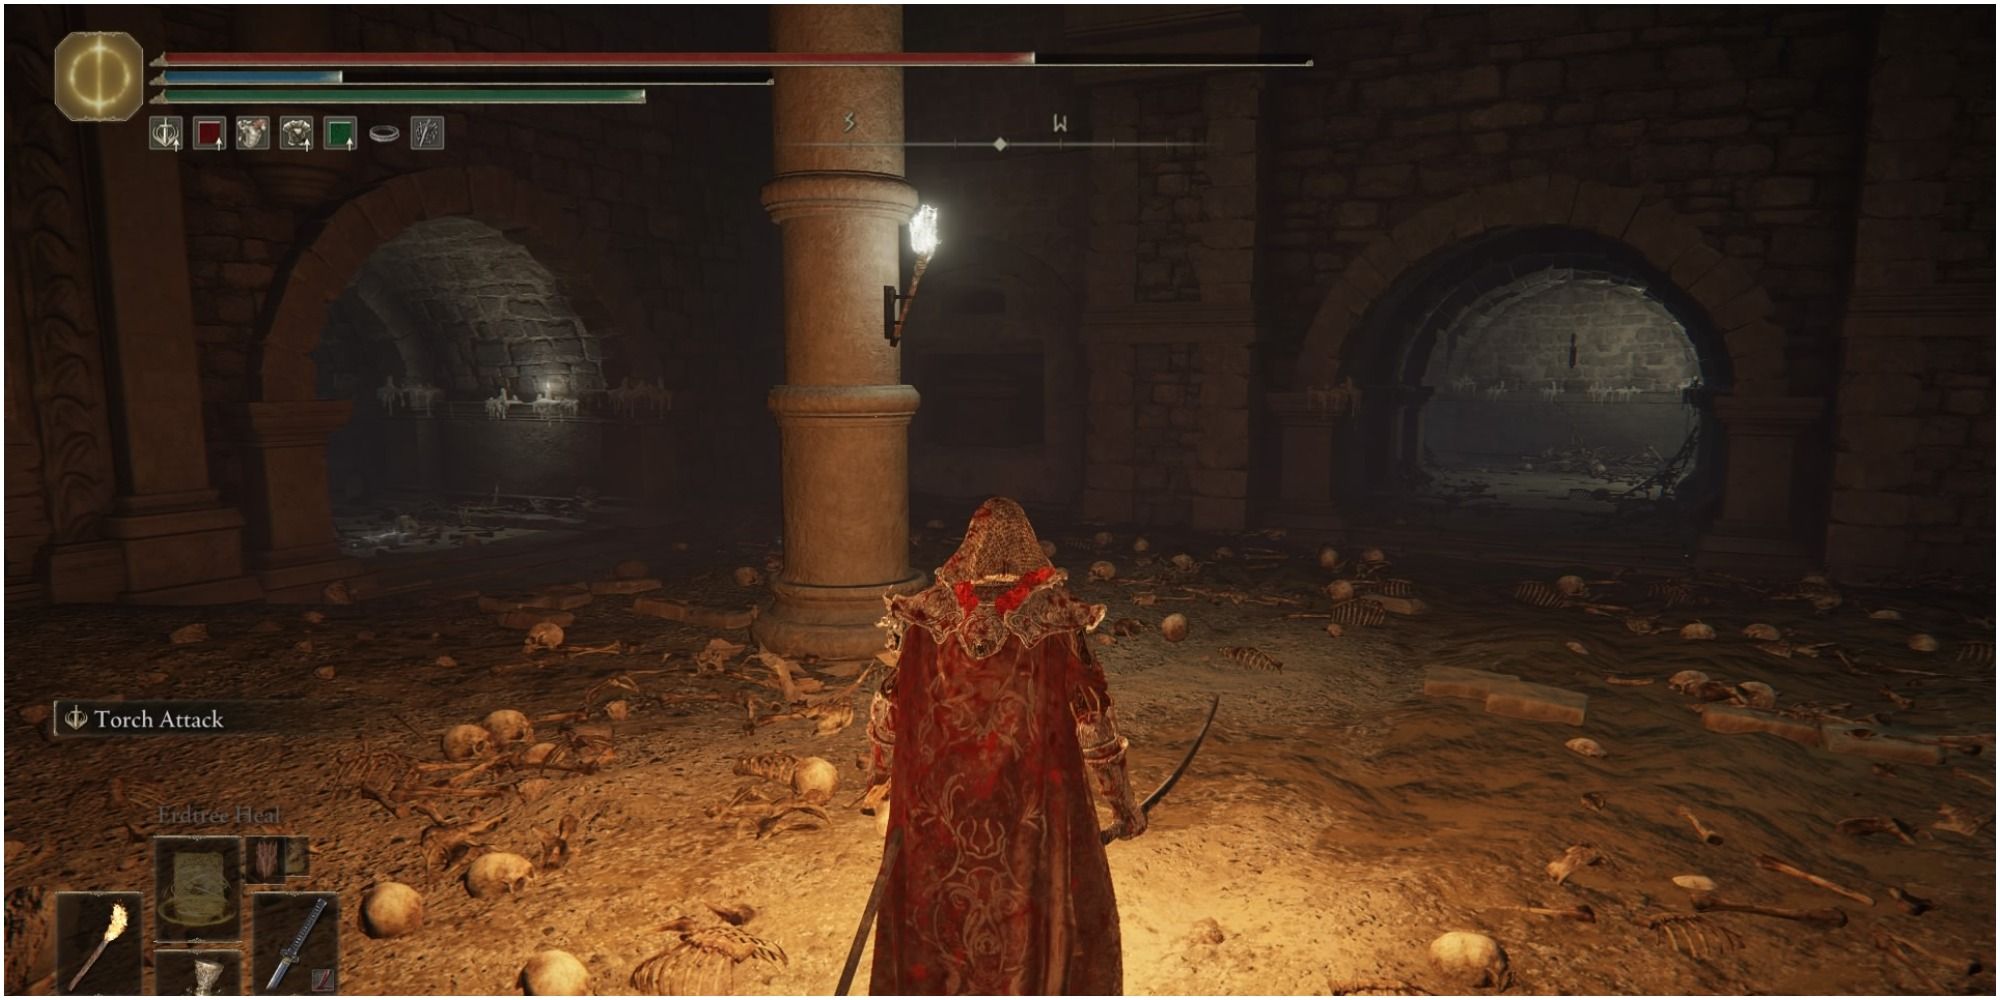 The player approaching two passageways.